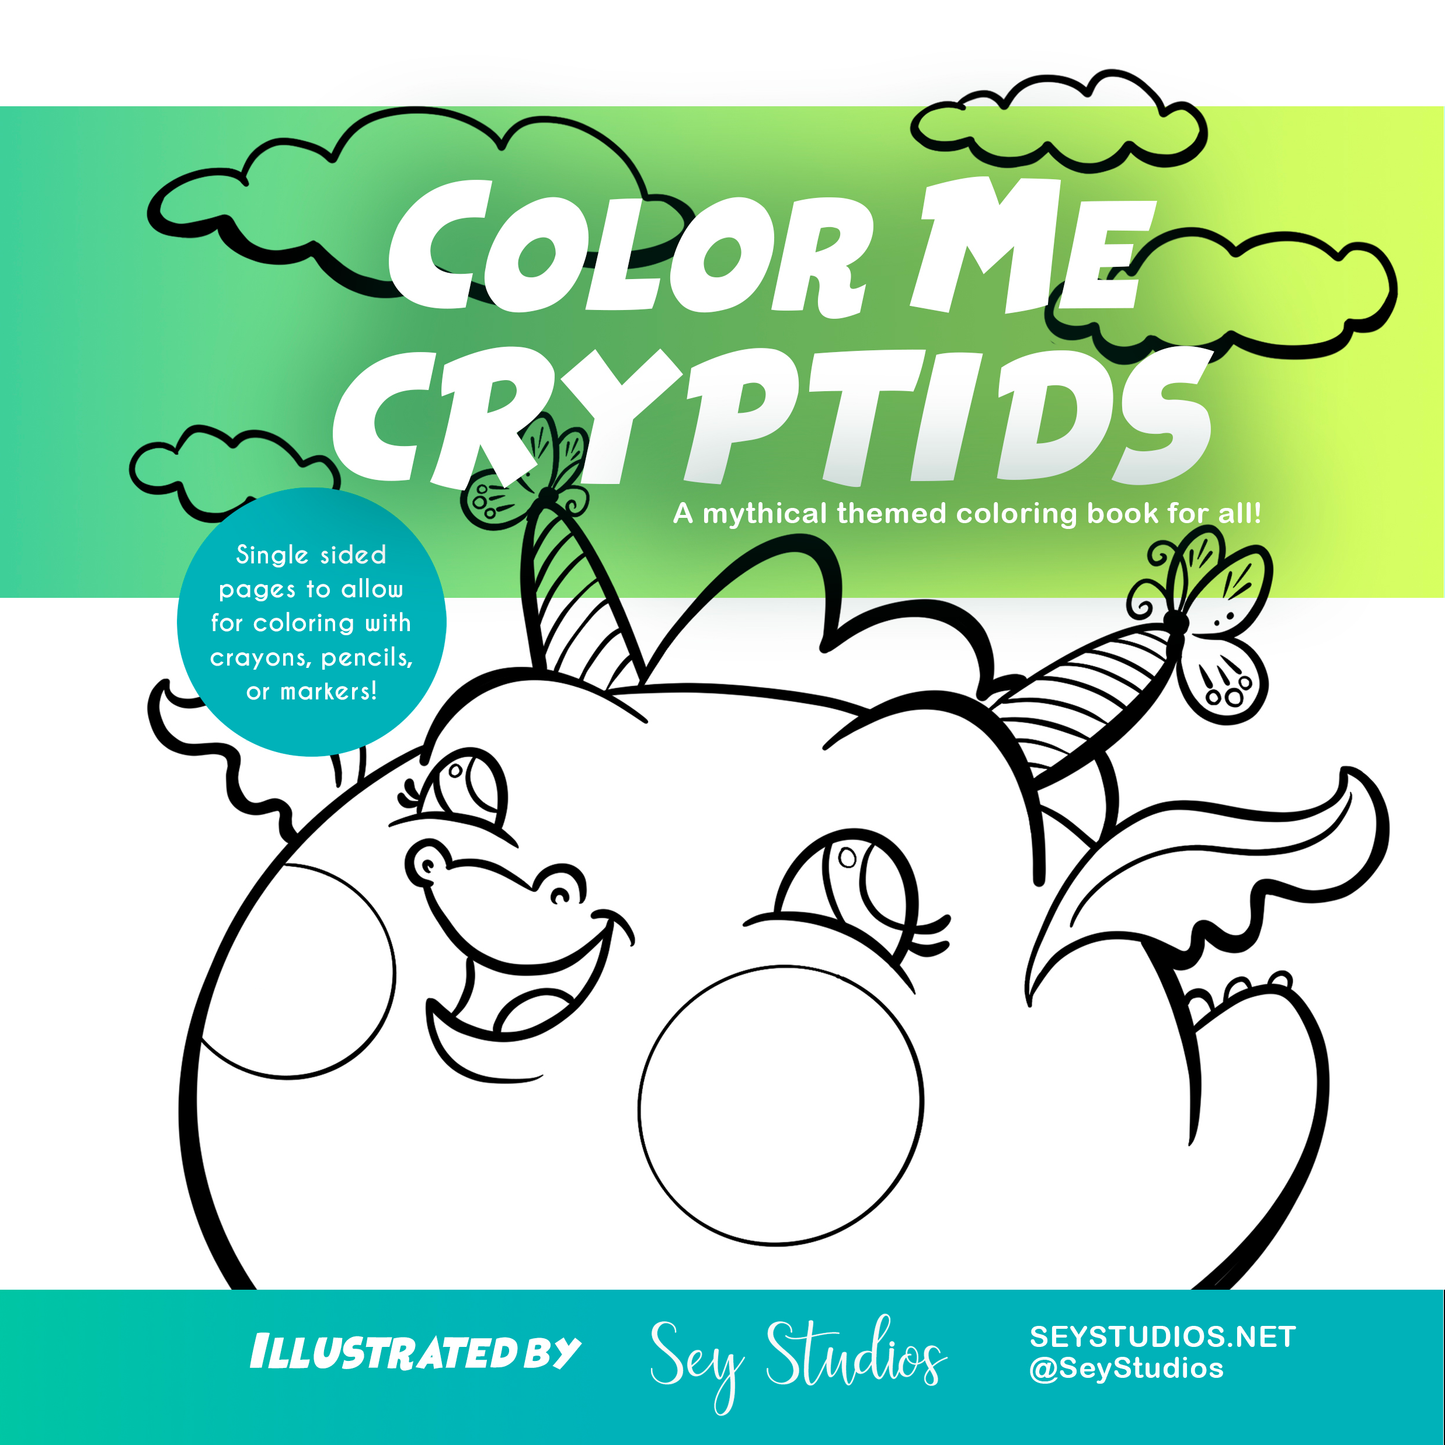 Color Me Cryptids, A mythical themed coloring book for all! Illustrated by Sey Studios